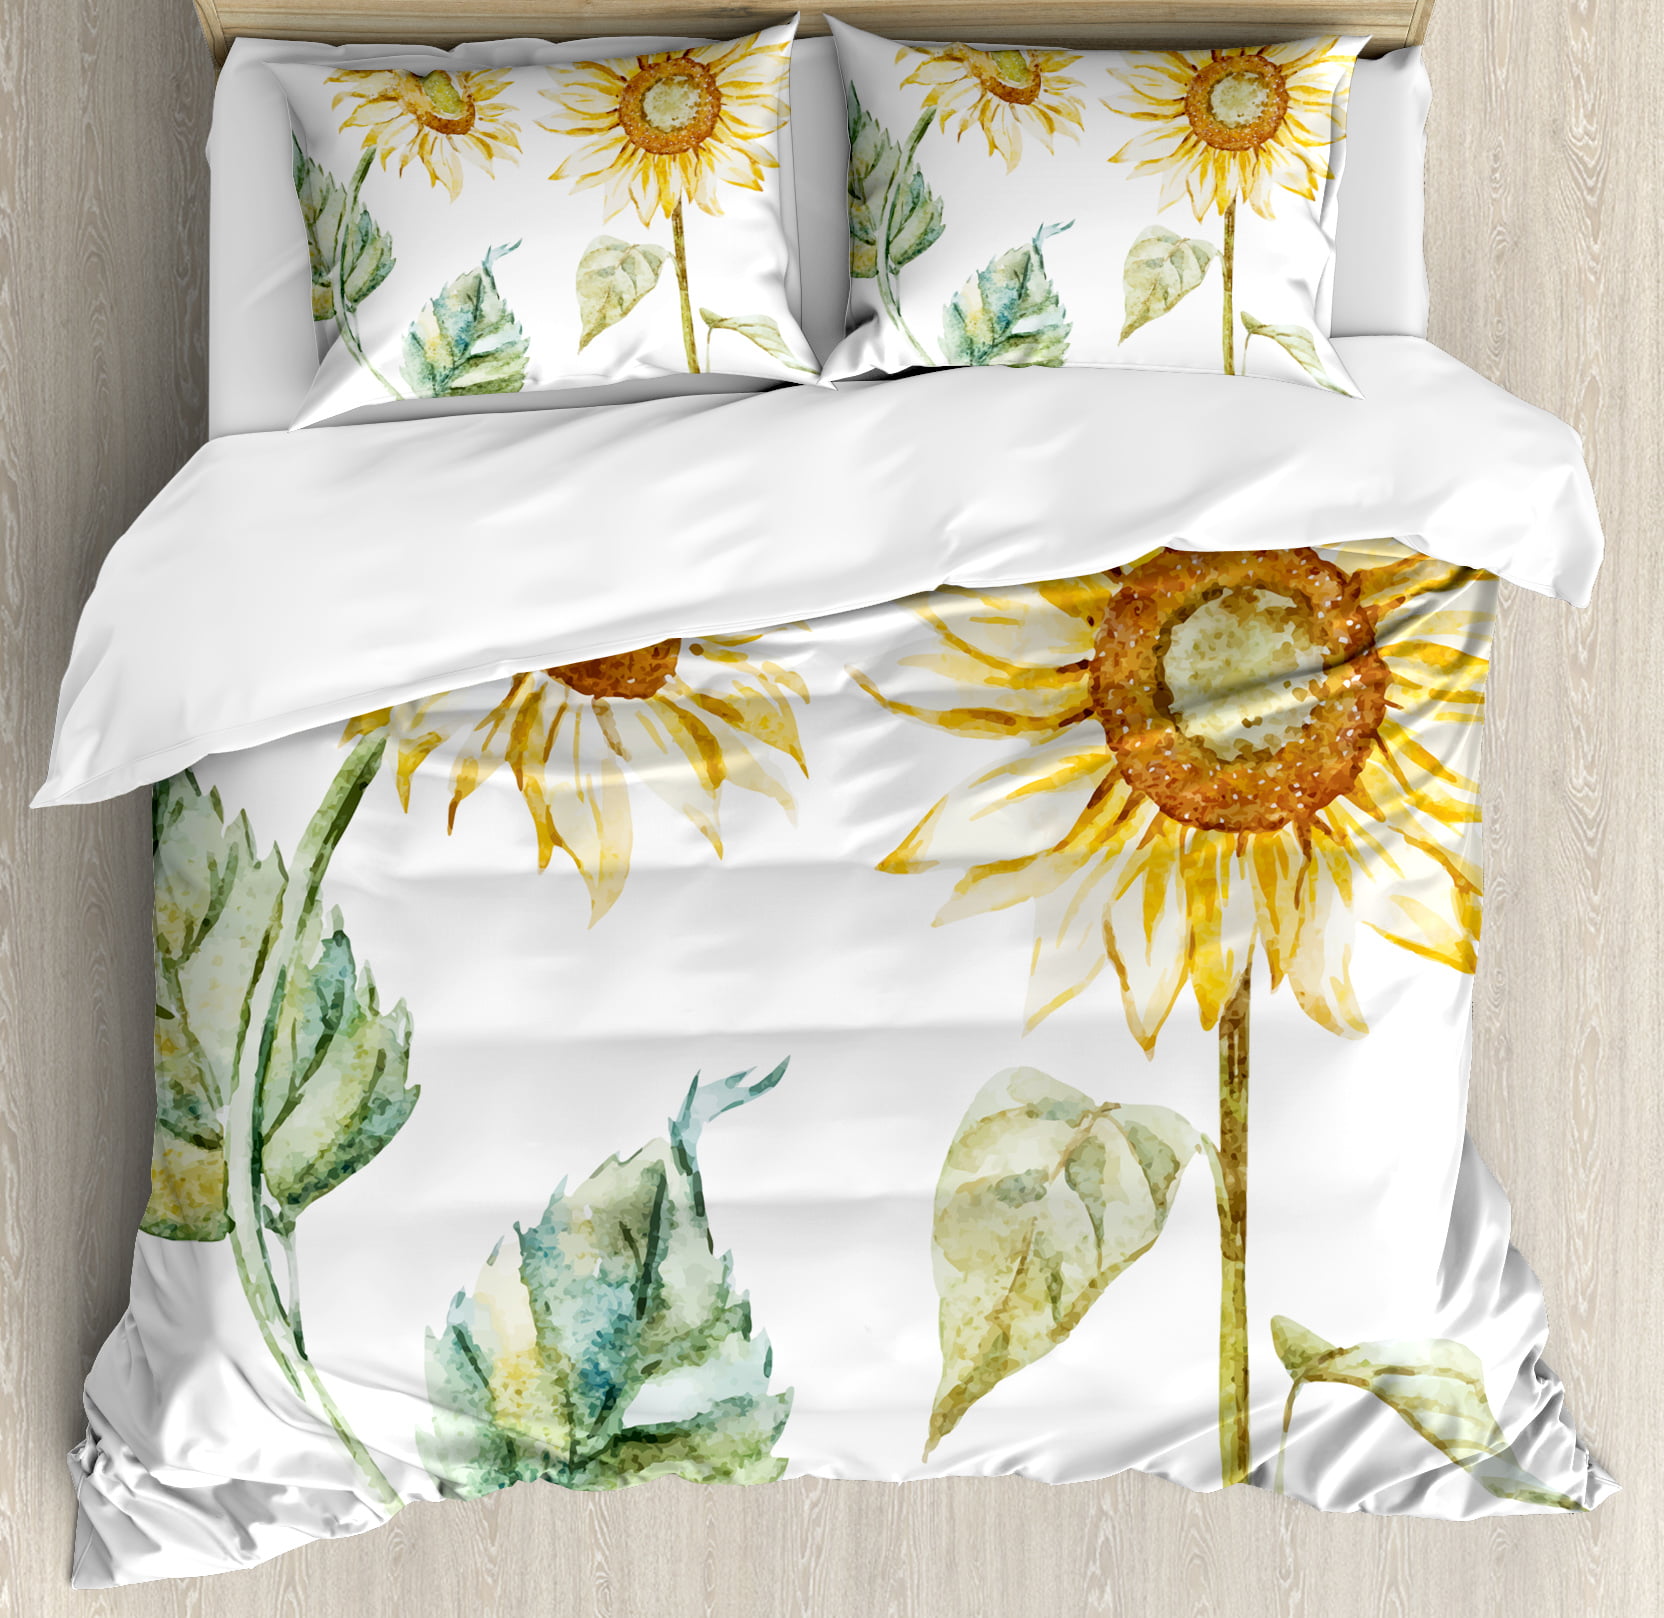 Watercolor King Size Duvet Cover Set Alluring Sunflowers Summer